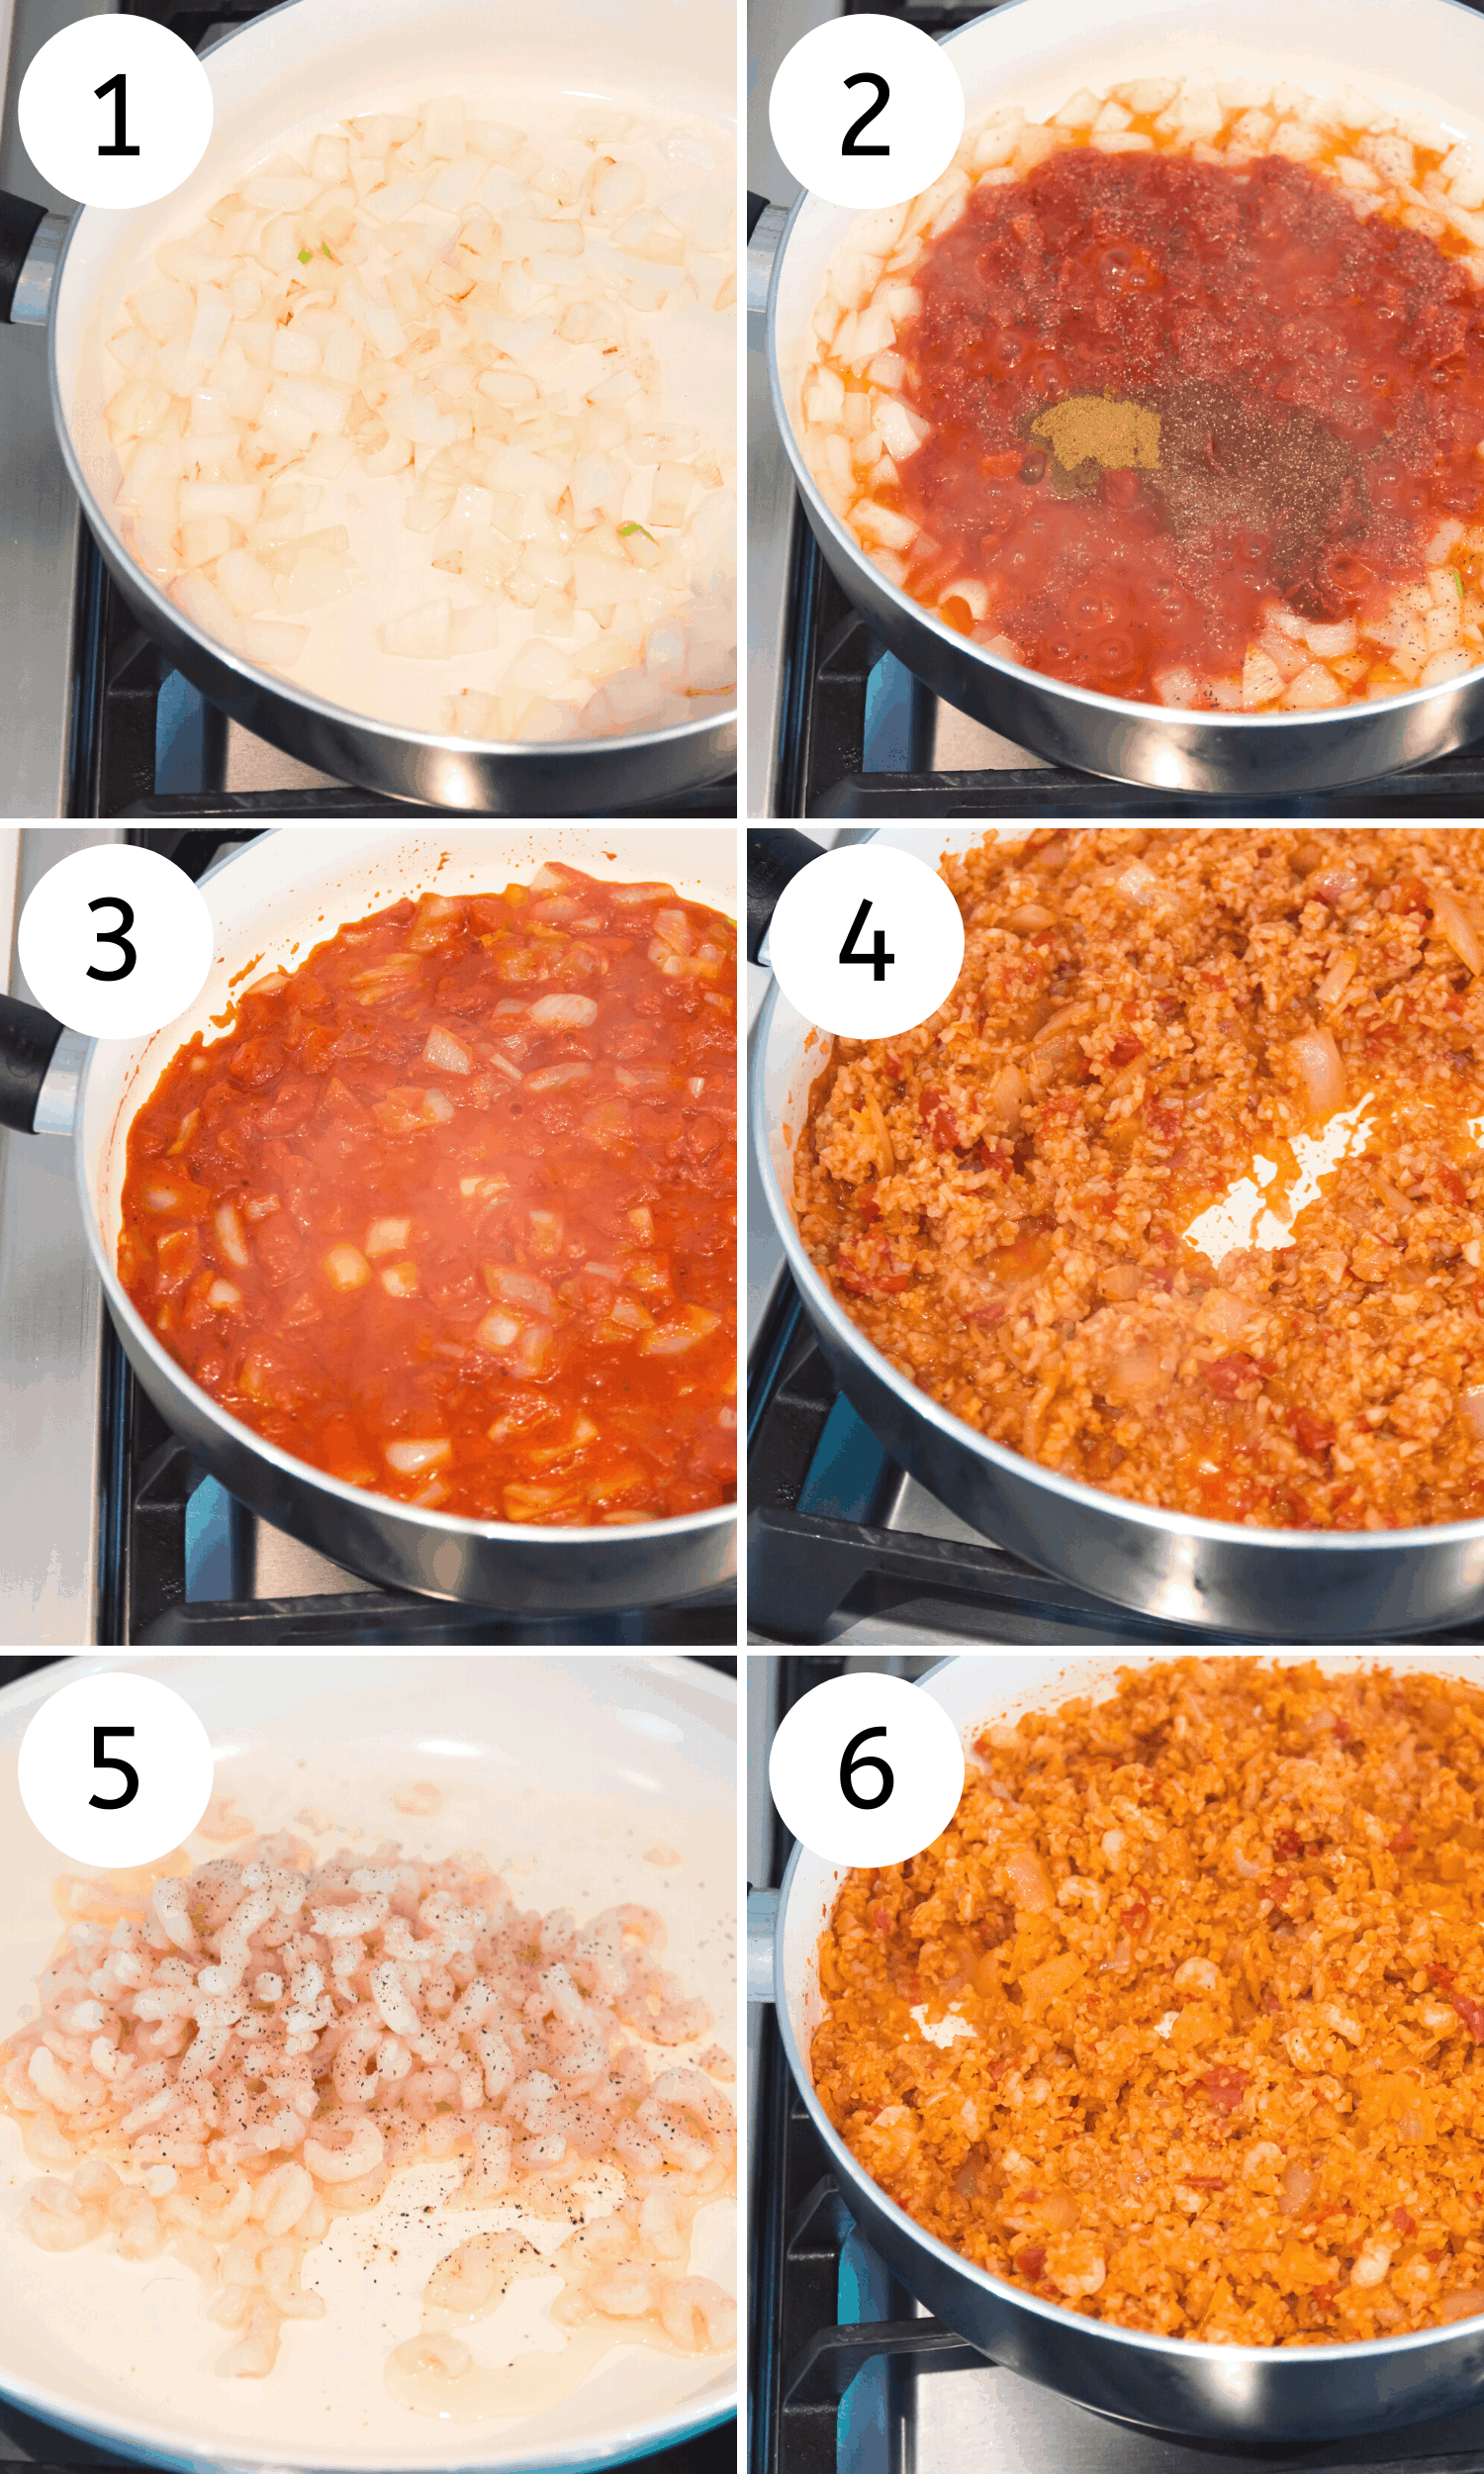 Step by step directions for making Spanish cauliflower rice in a pan on the stovetop.